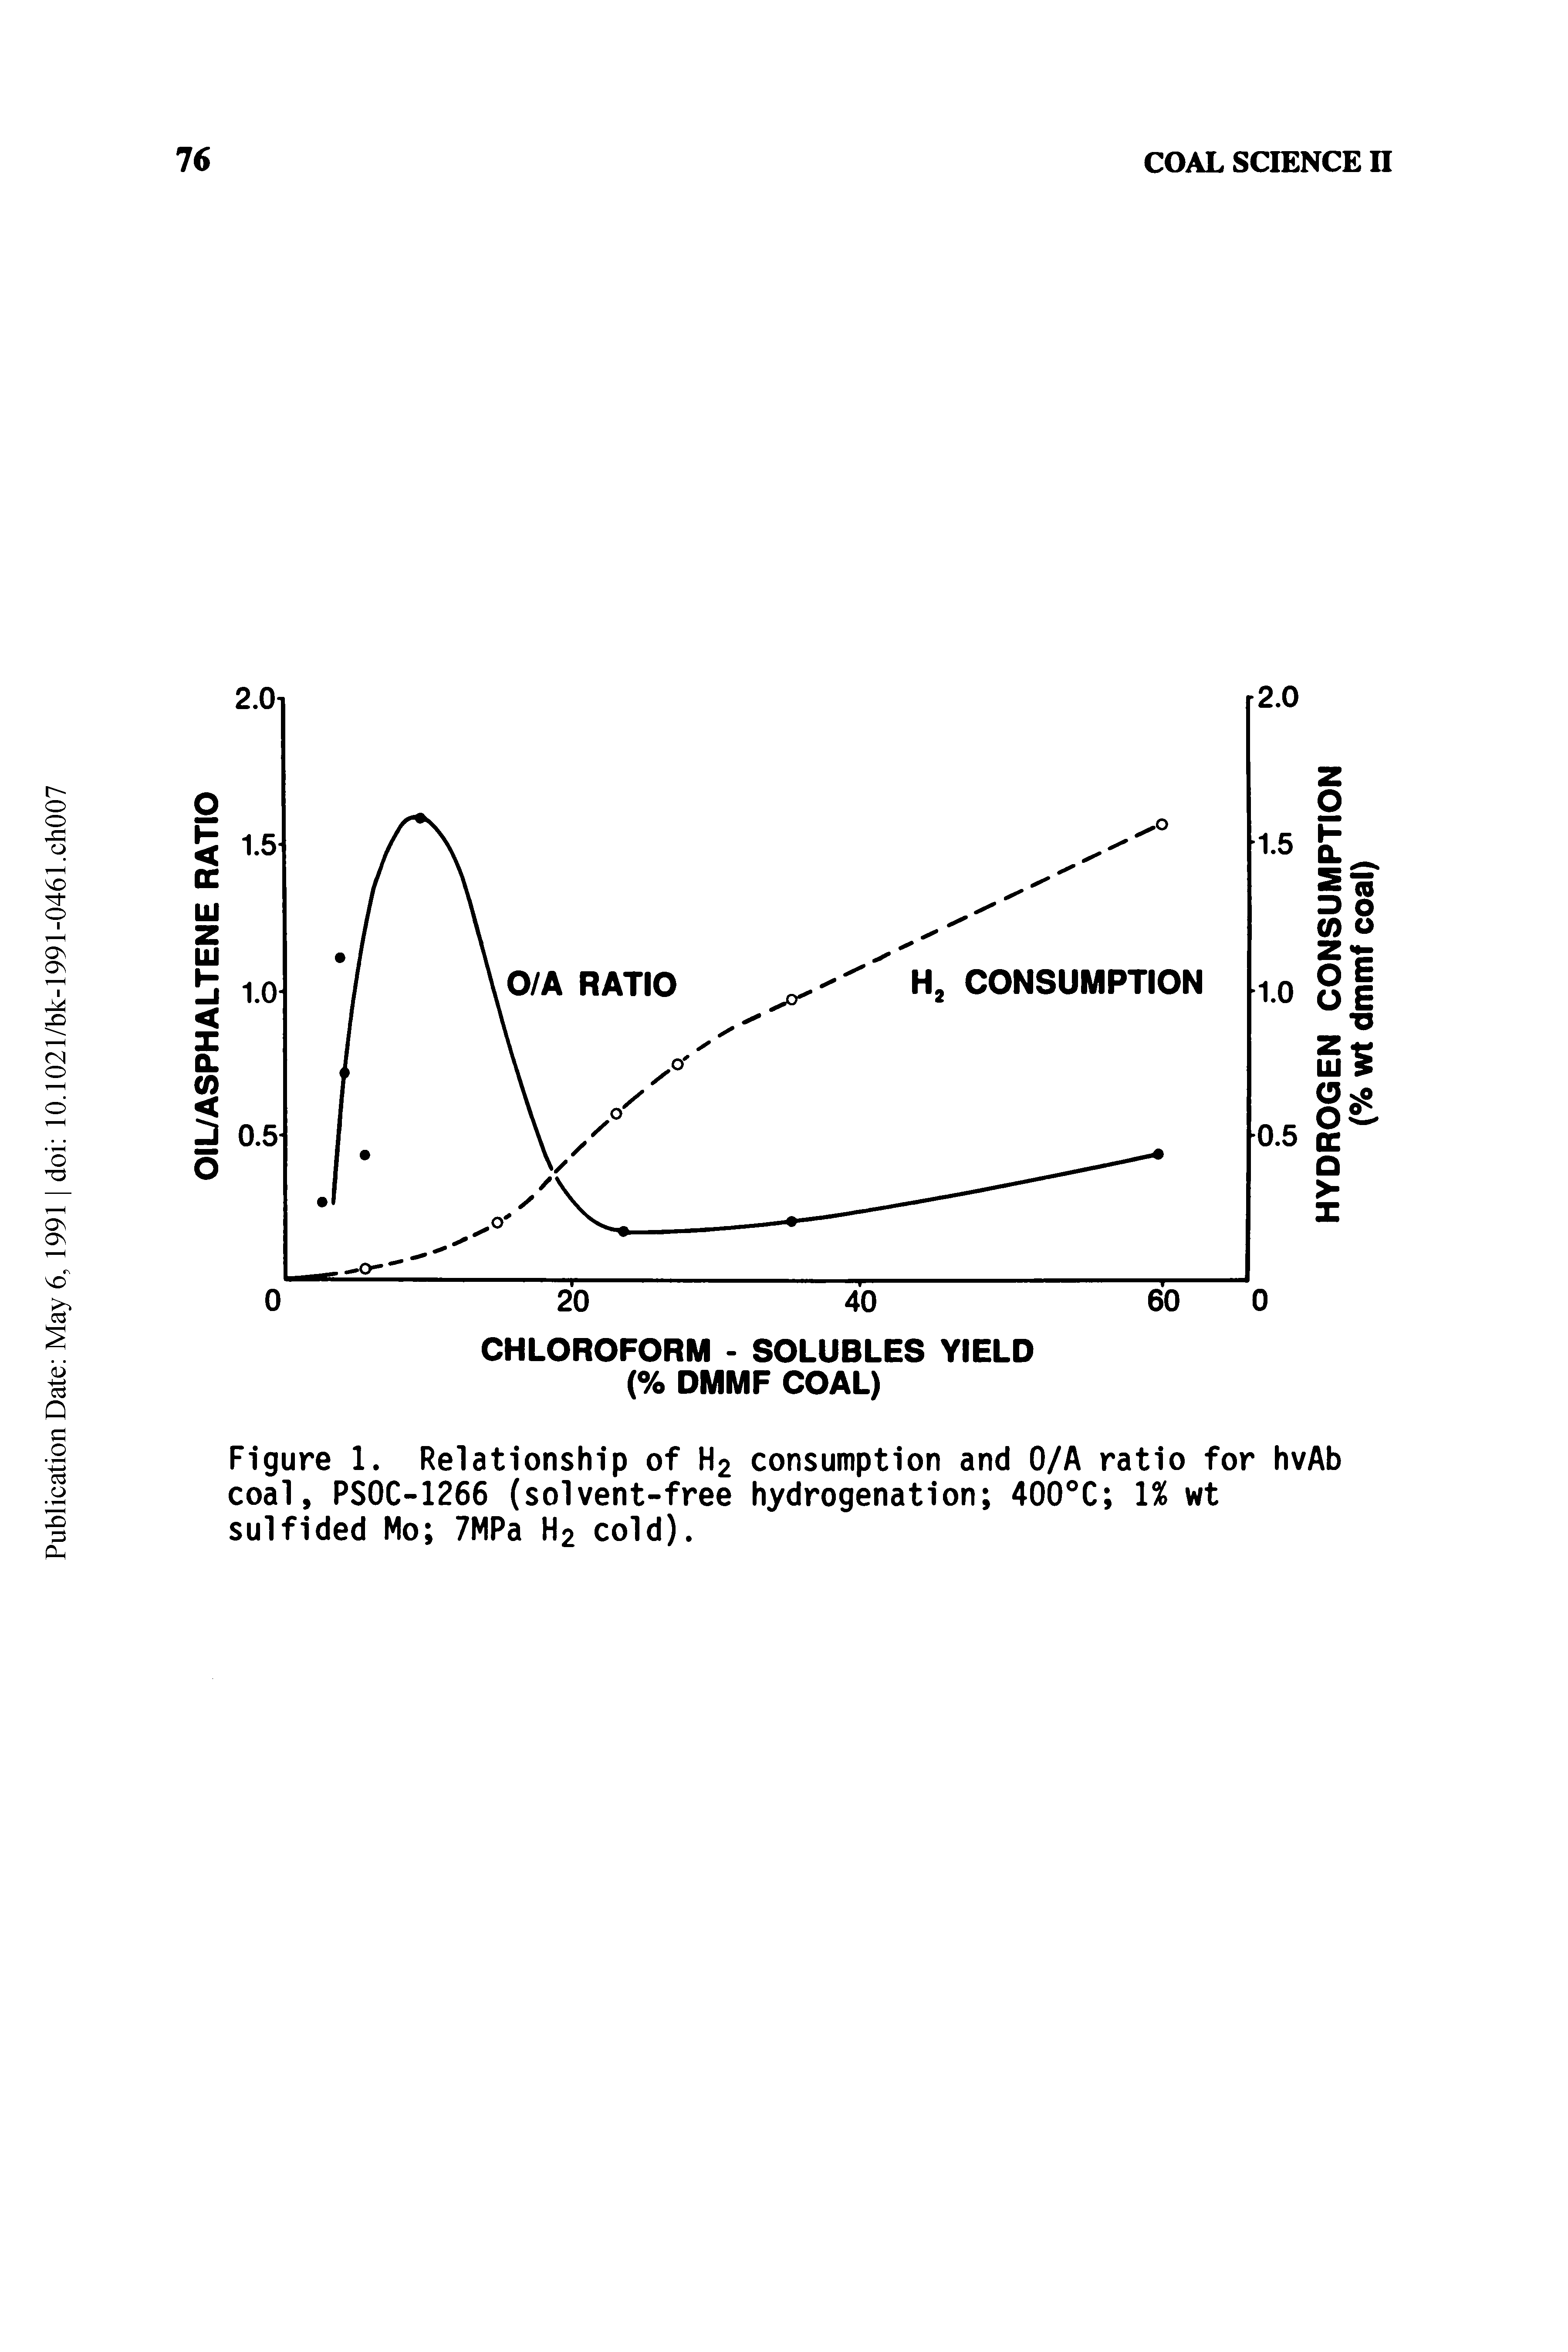 Figure 1. Relationship of H2 consumption and 0/A ratio for hvAb coal, PSOC-1266 (solvent-free hydrogenation 400°C 1% wt sulfided Mo 7MPa H2 cold).